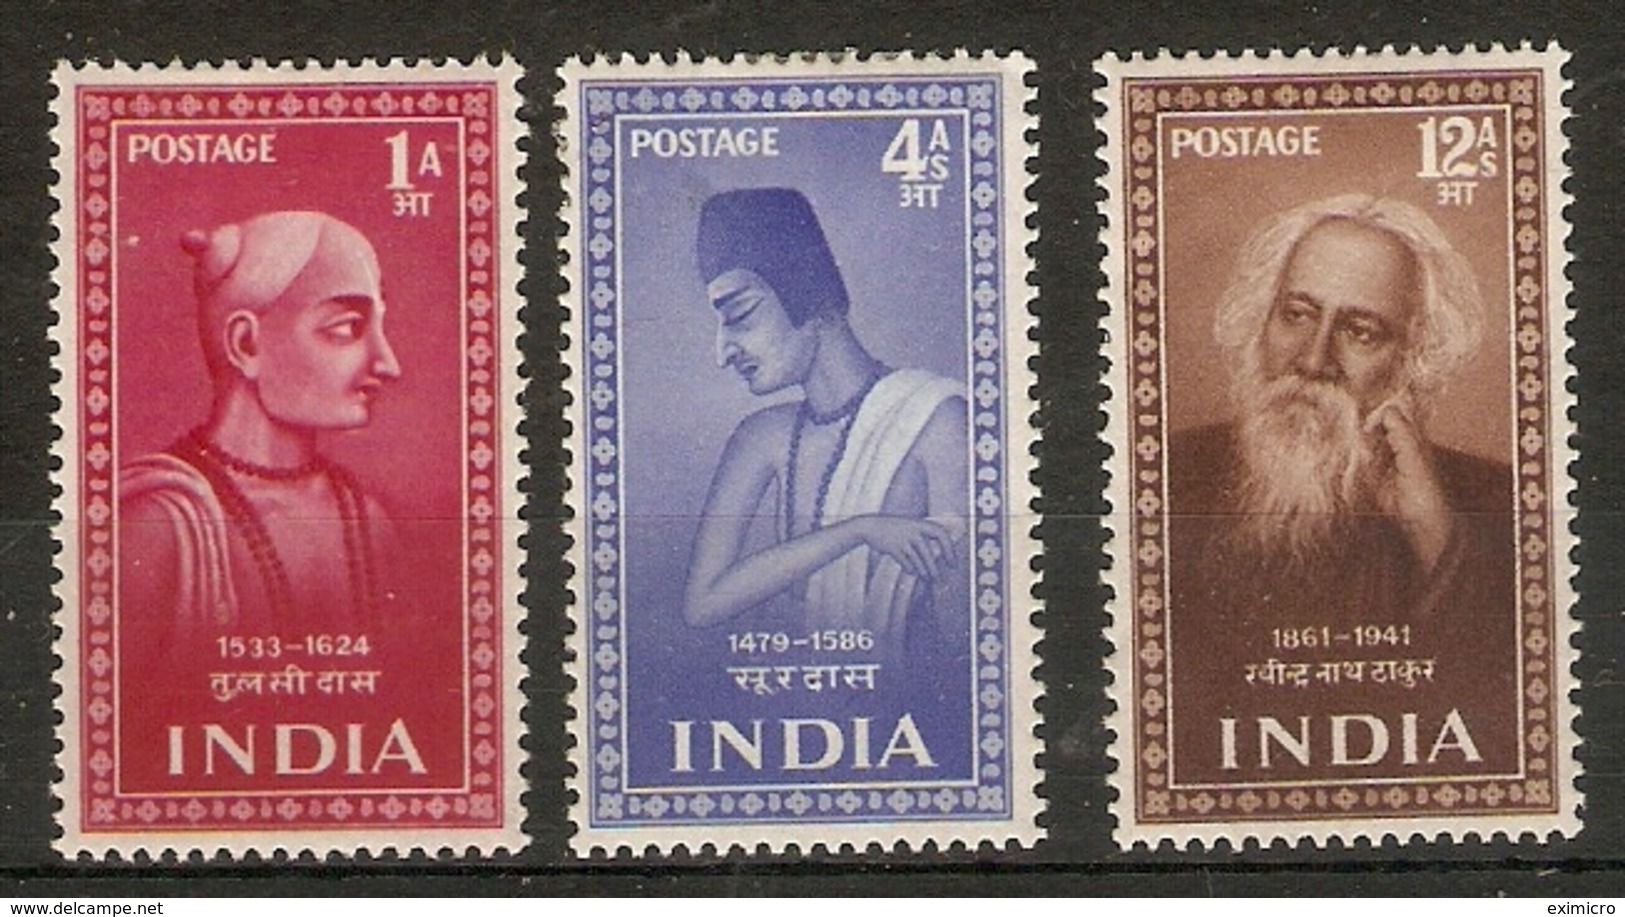 INDIA 1952 1a, 4a And 12a SG 338, 340 AND 342 MOUNTED MINT HIGH CATALOGUE VALUE - Unused Stamps